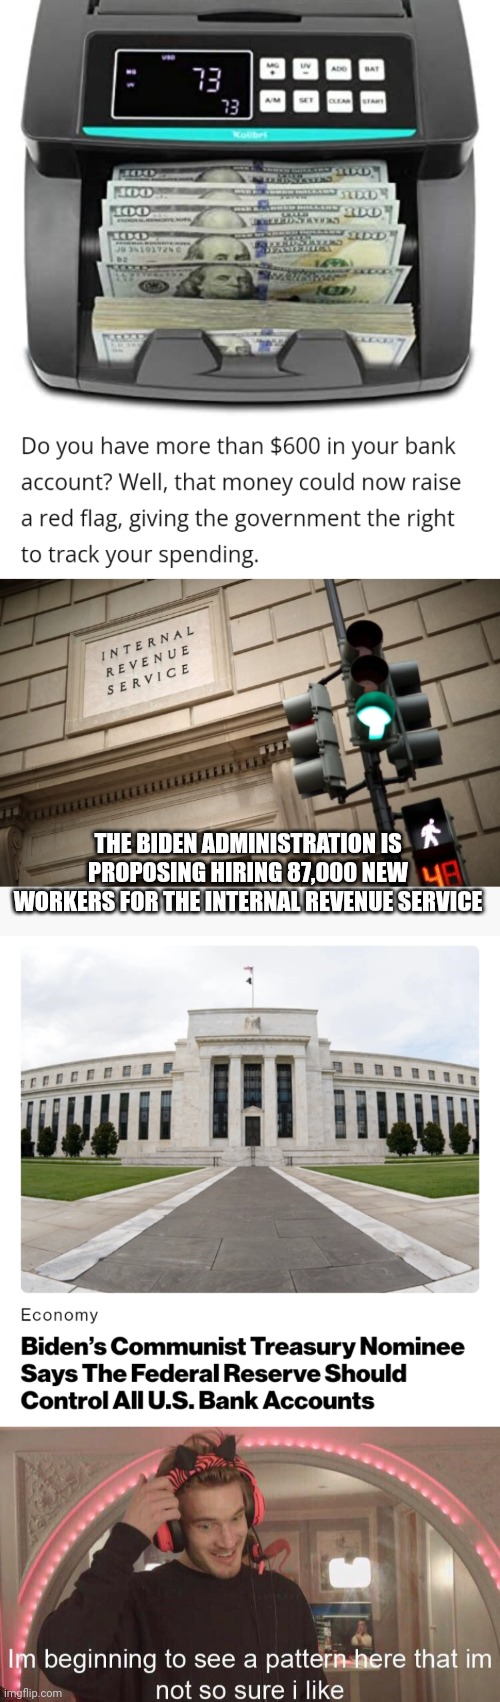 THE BIDEN ADMINISTRATION IS PROPOSING HIRING 87,000 NEW WORKERS FOR THE INTERNAL REVENUE SERVICE | image tagged in funny memes | made w/ Imgflip meme maker